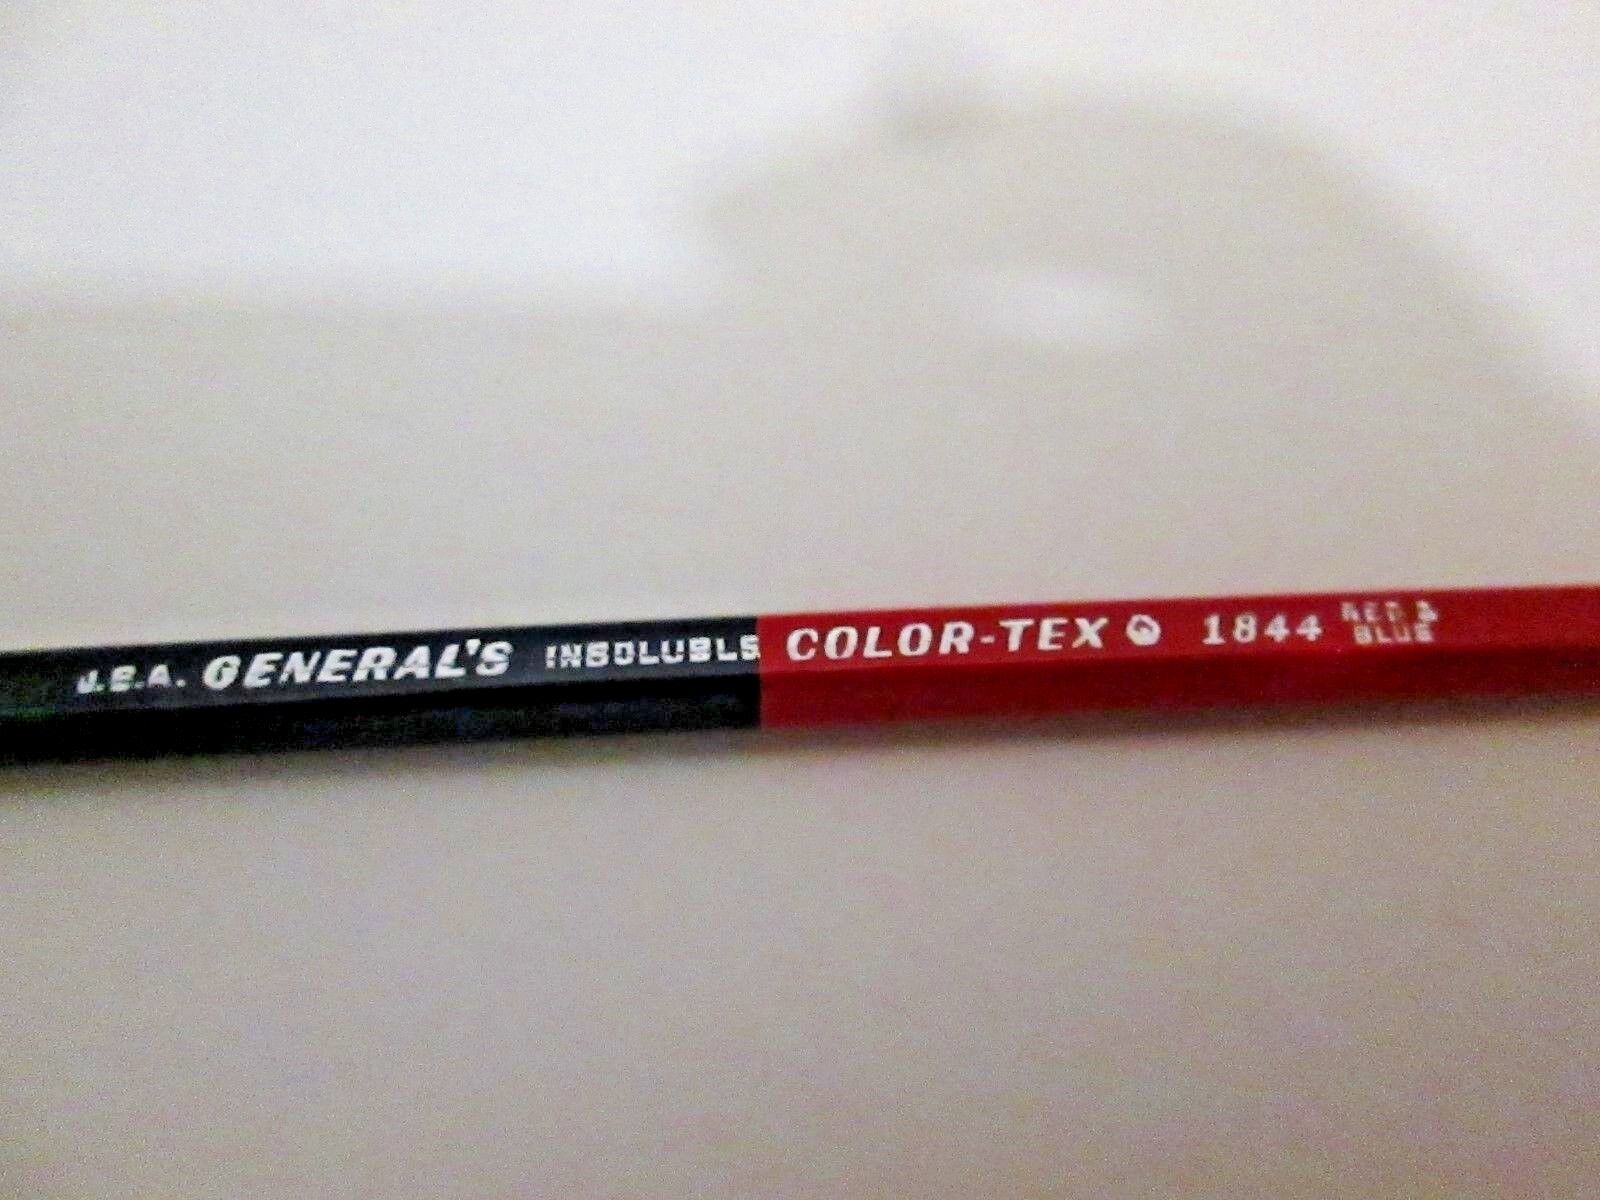 NOS VTG GENERAL'S 1844 COLOR-TEX COLLECTABLE WOOD PENCIL RED/BLUE INSOLUABLE USA